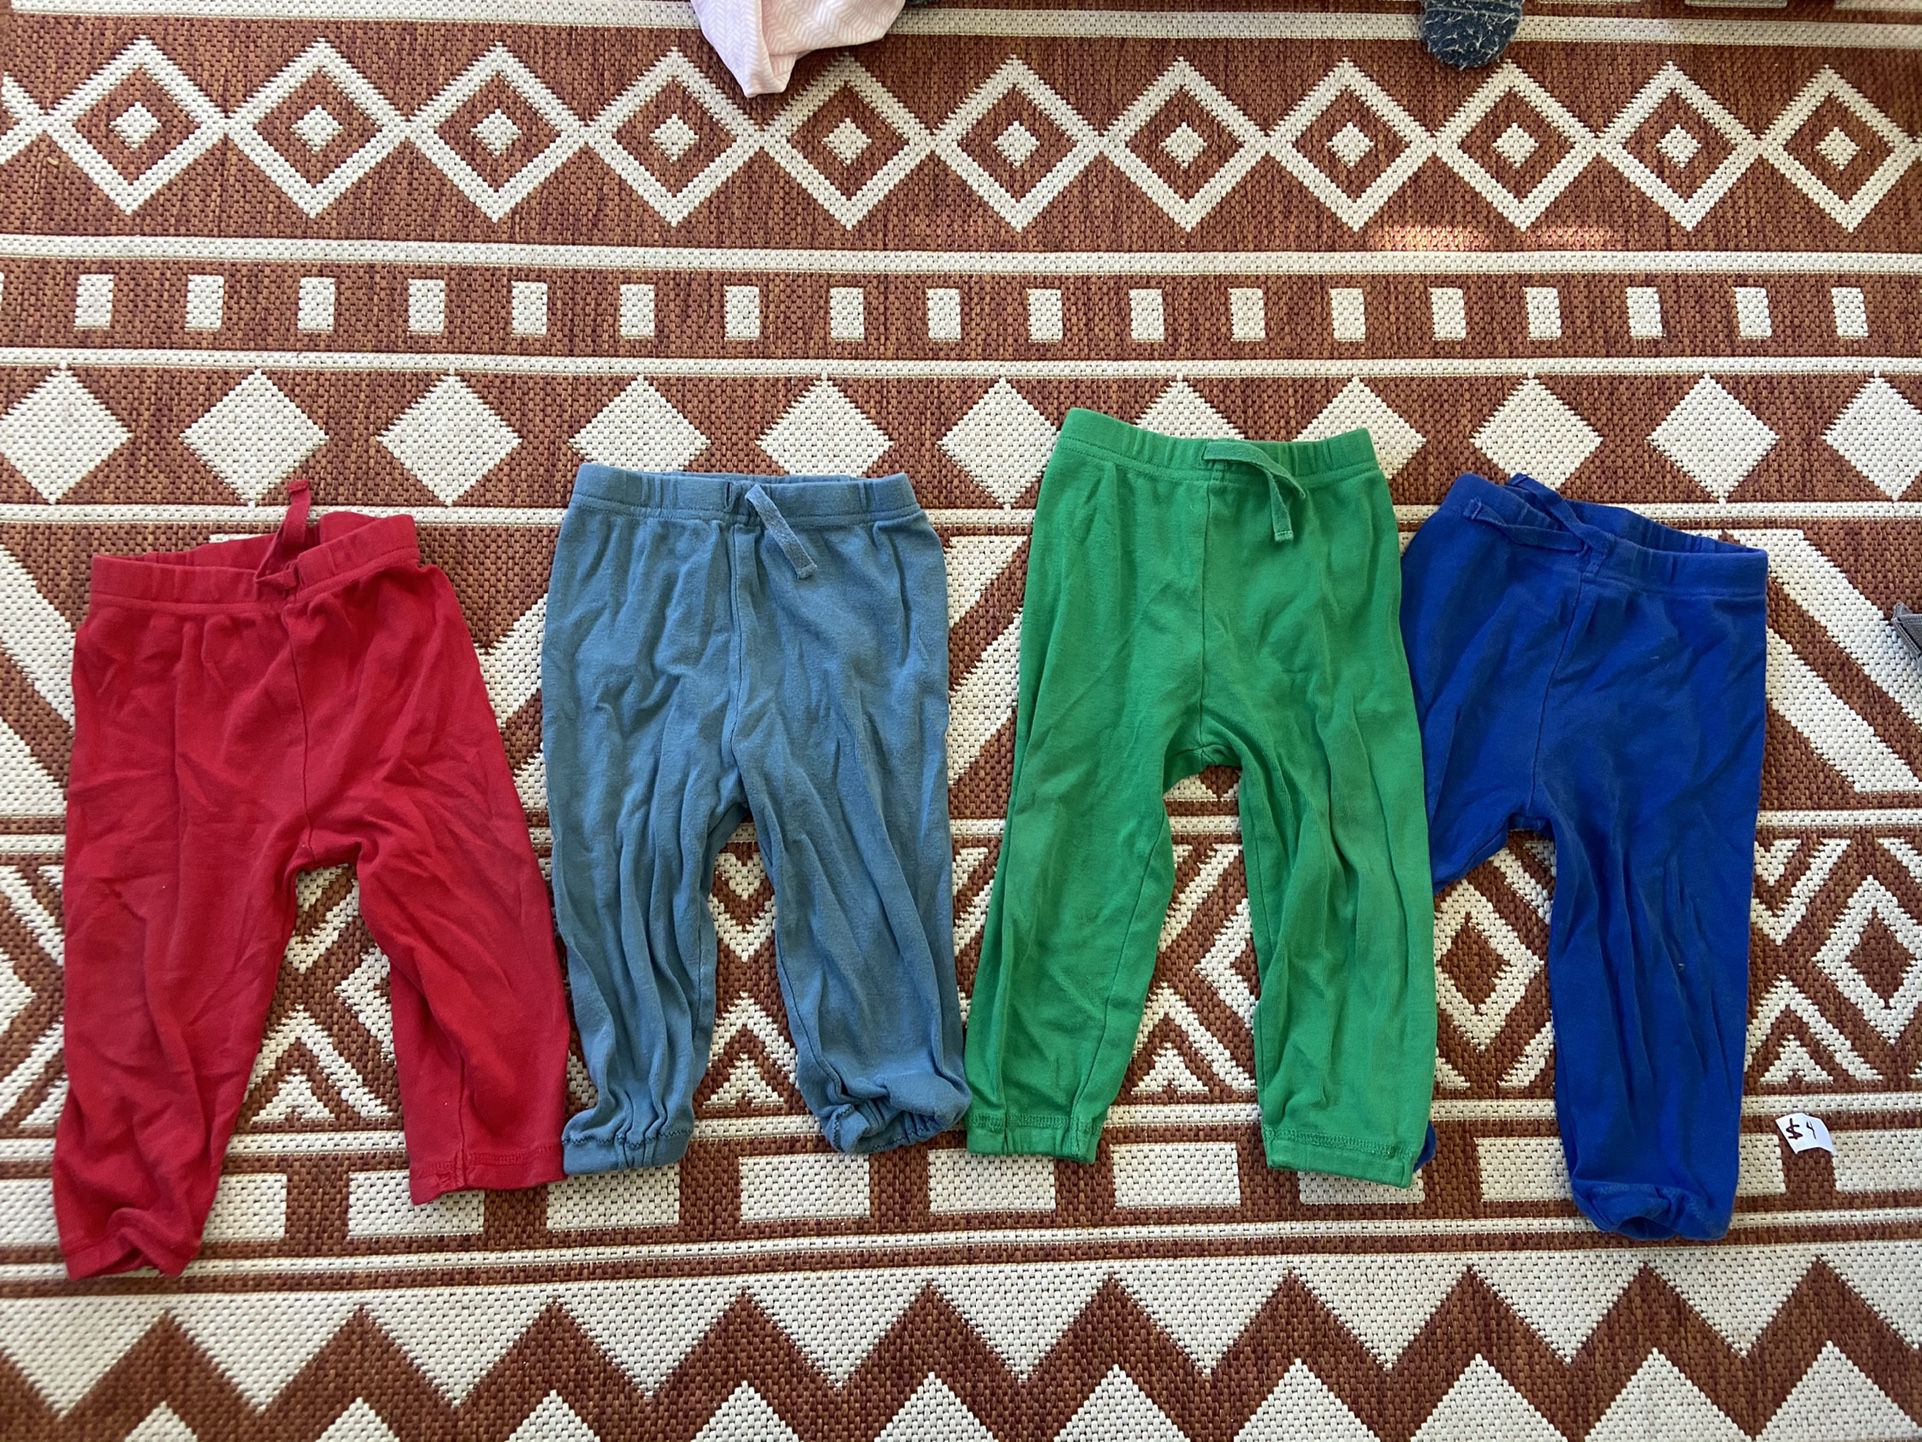 Baby Pants that fit cloth diapers